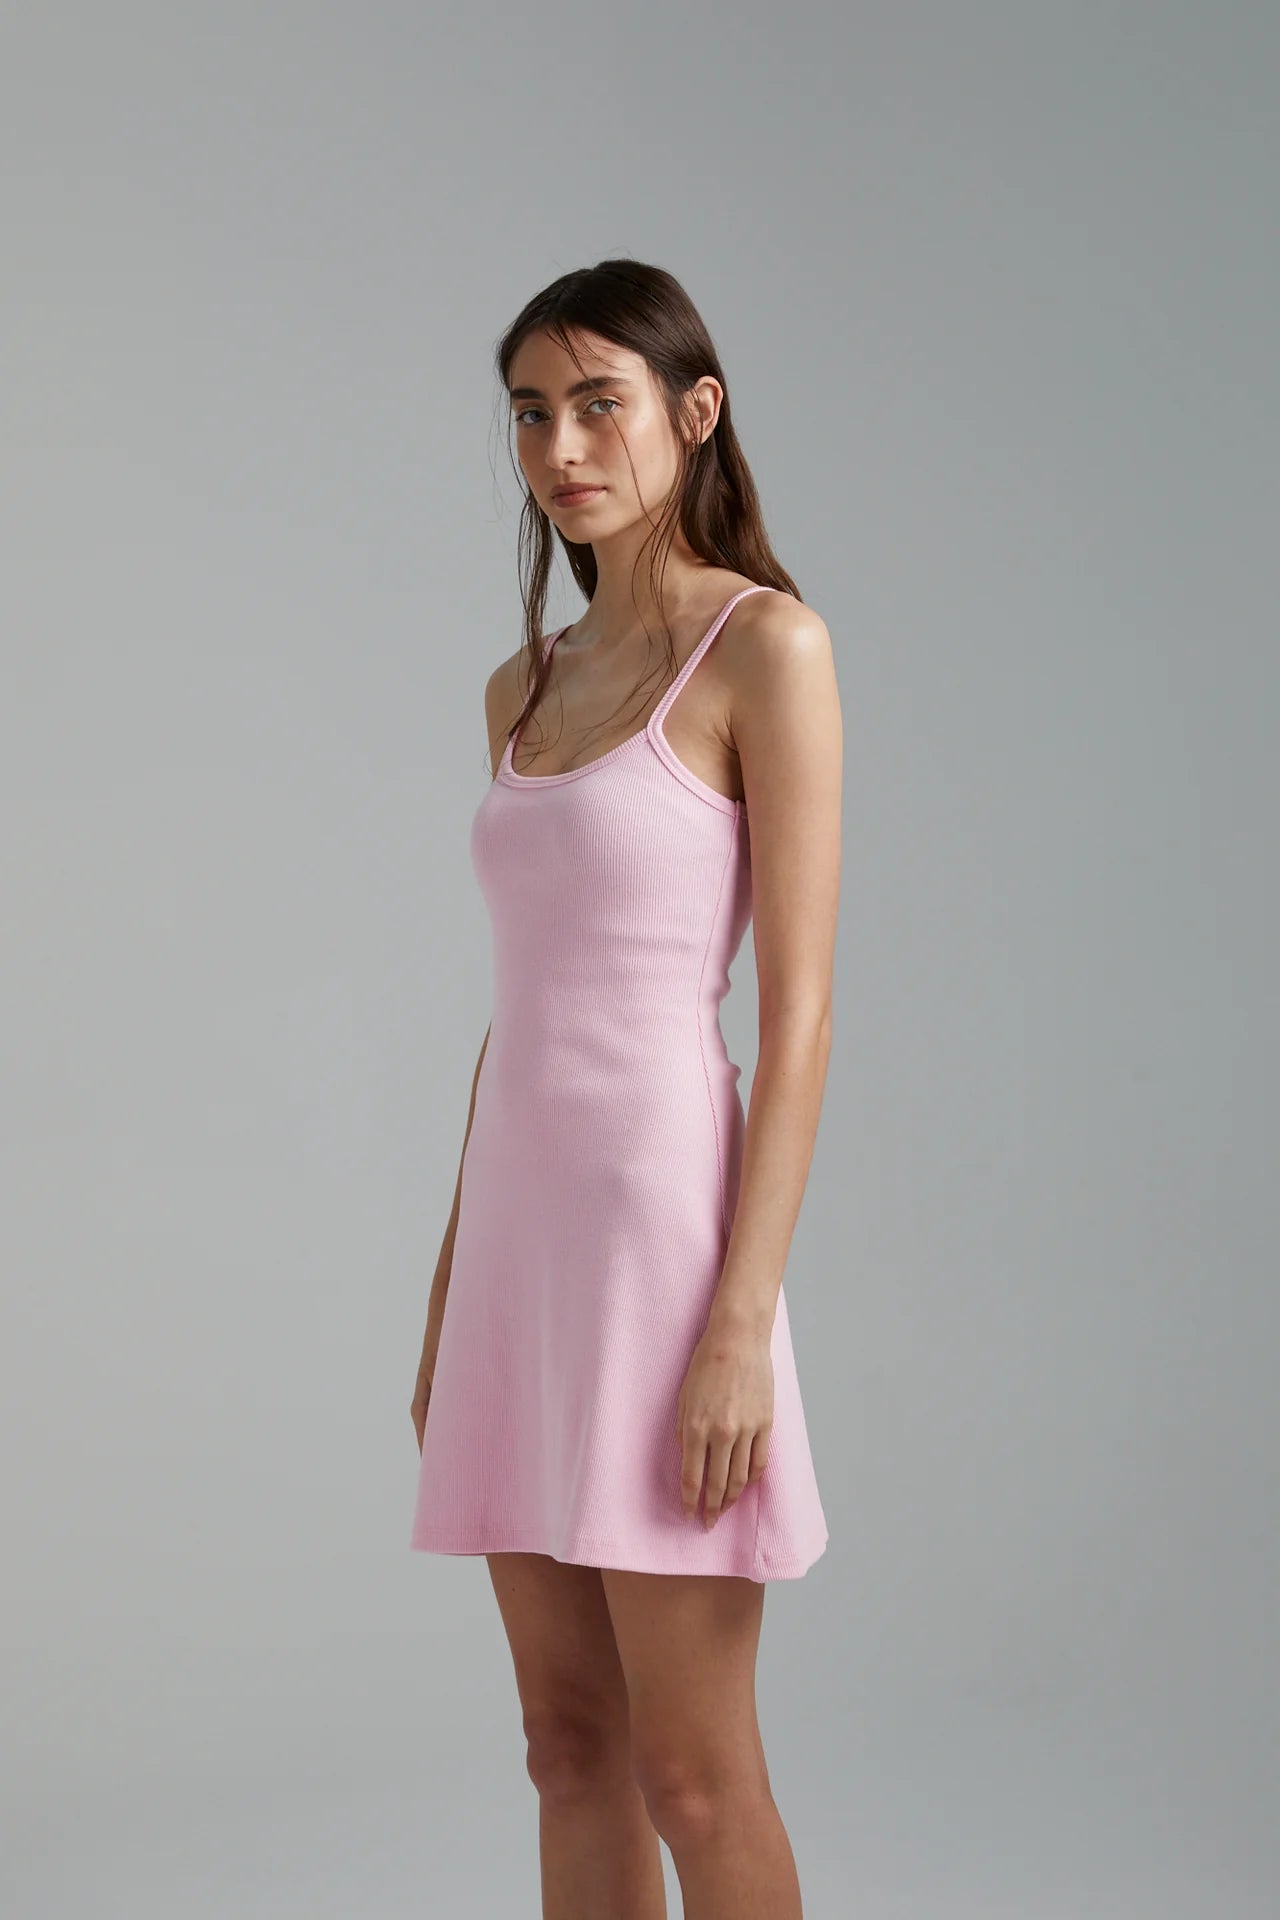 The infamous Summi A-line is back! Cut from form flattering ribbed cotton in feminine pink, this simple dress is every gals dream!